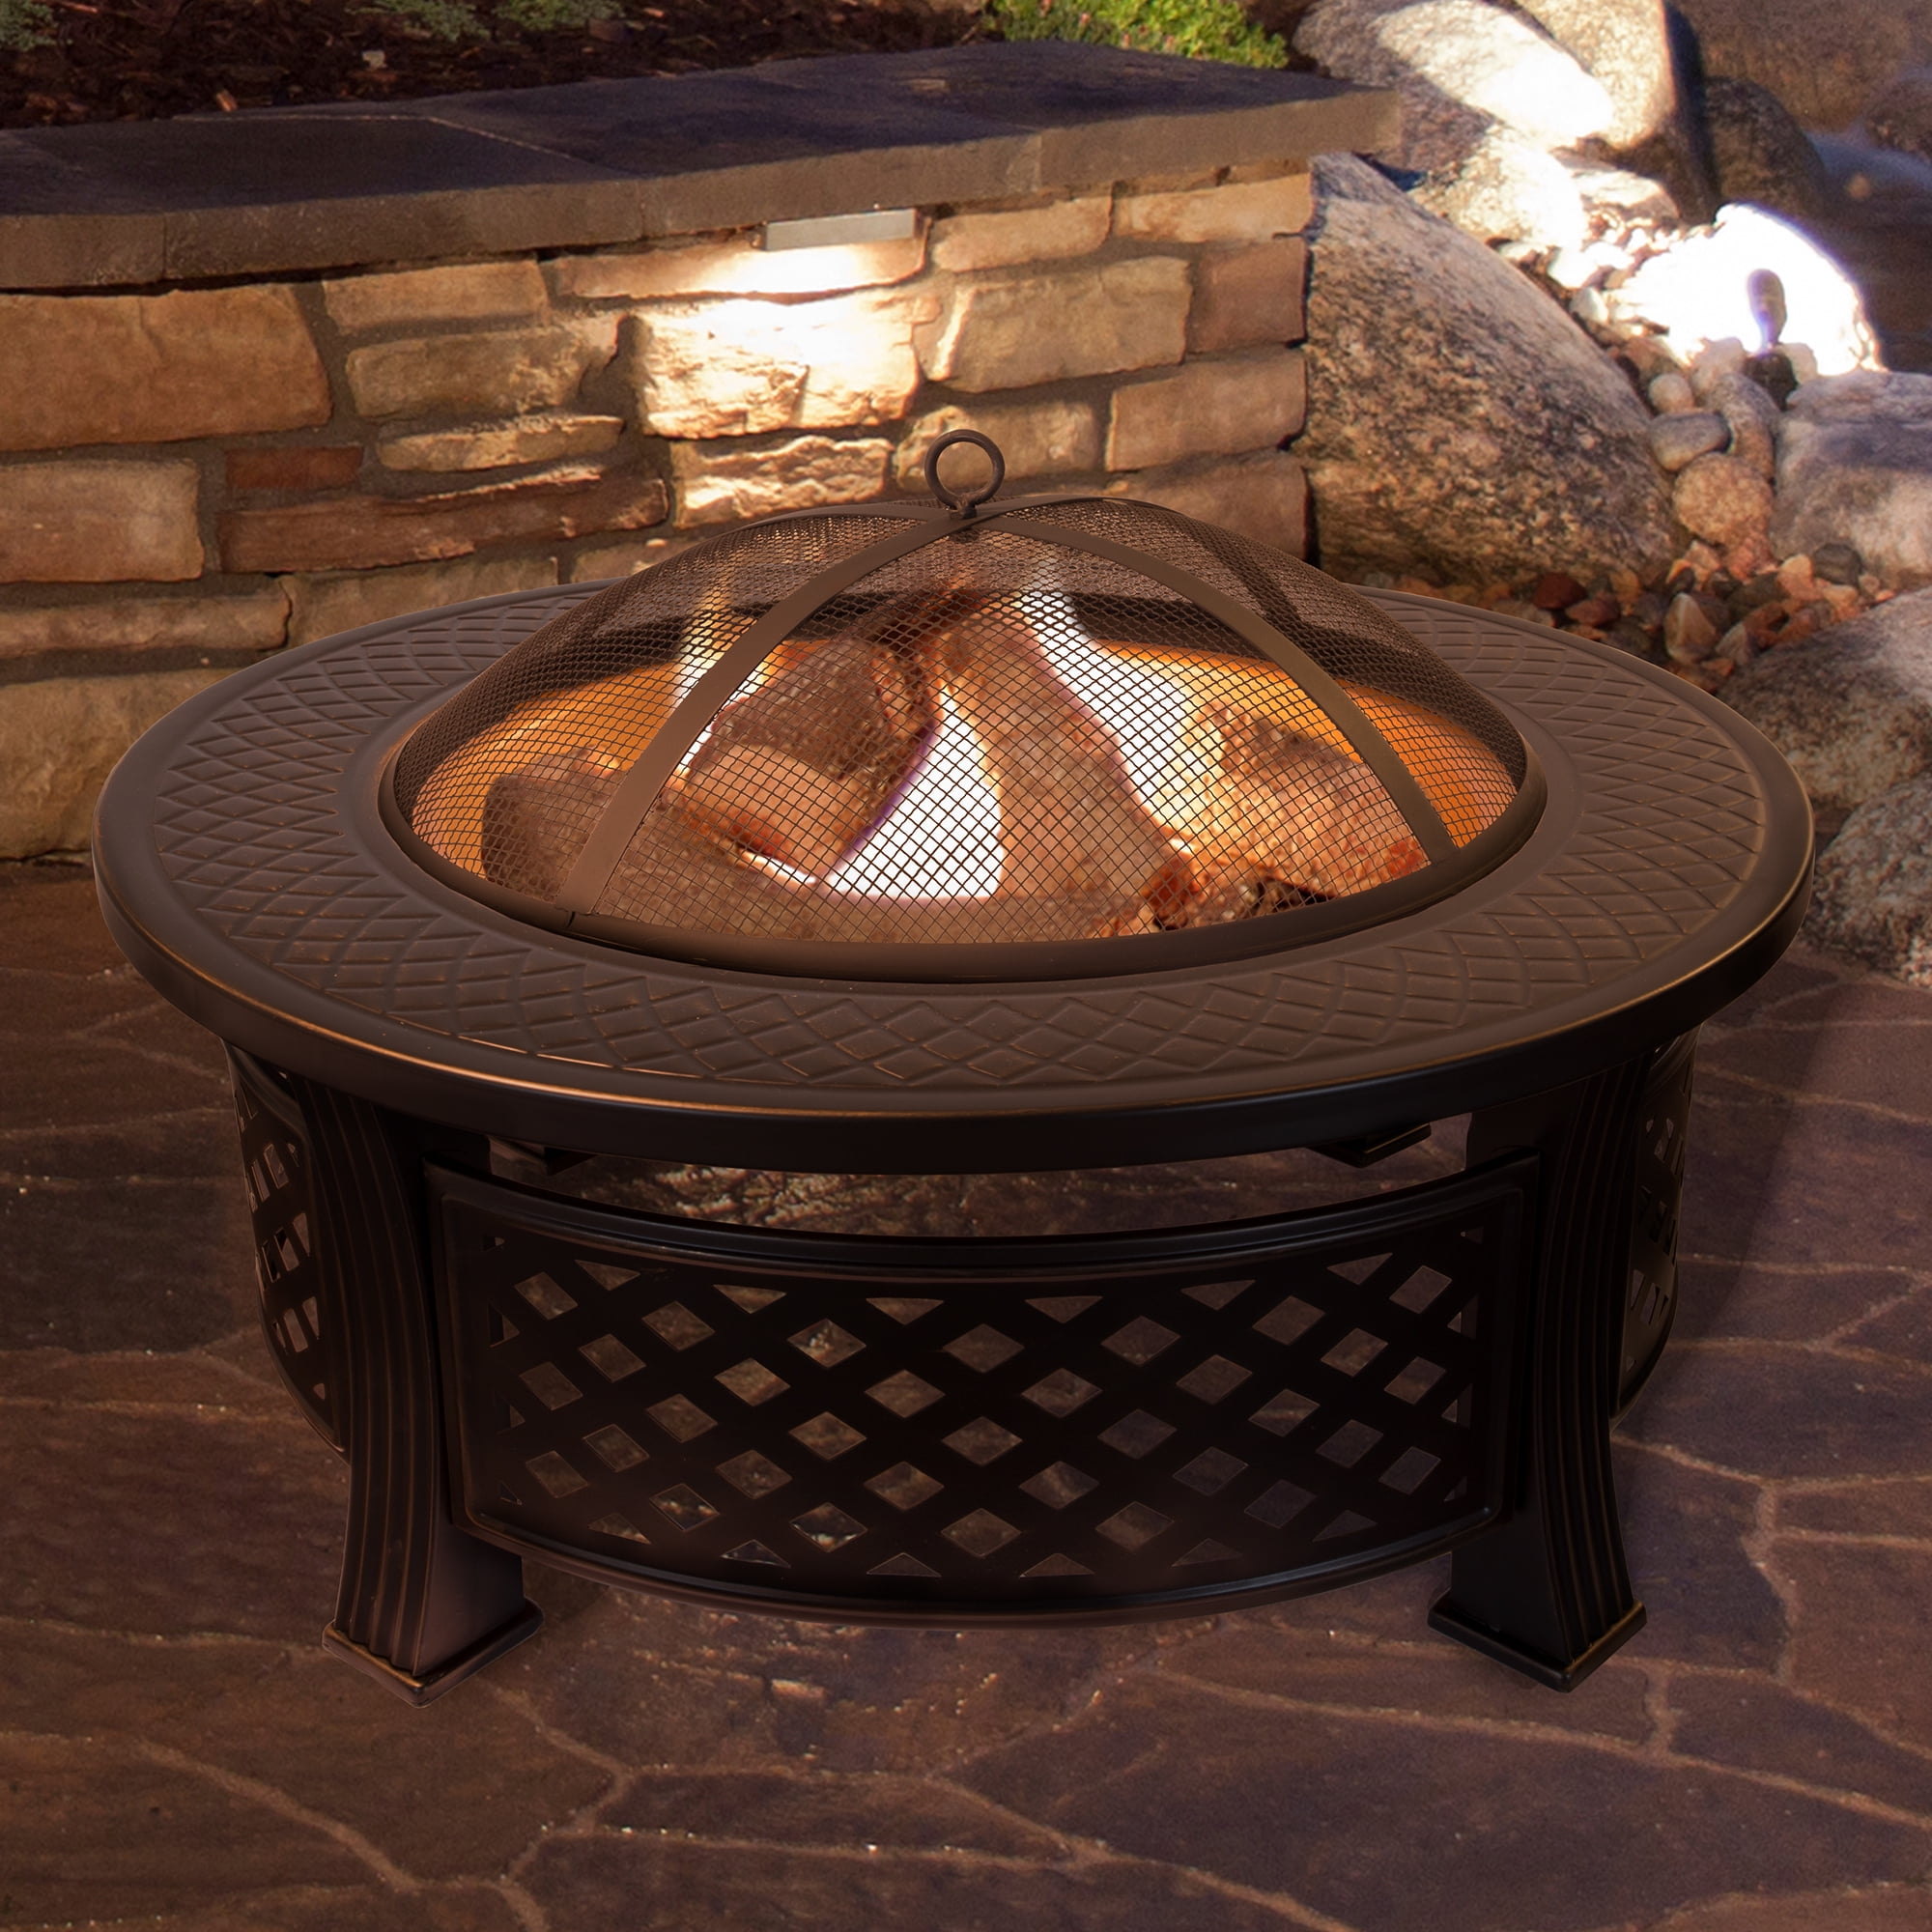 Fire Pit Set, Wood Burning Pit - Includes Spark Screen and Log Poker